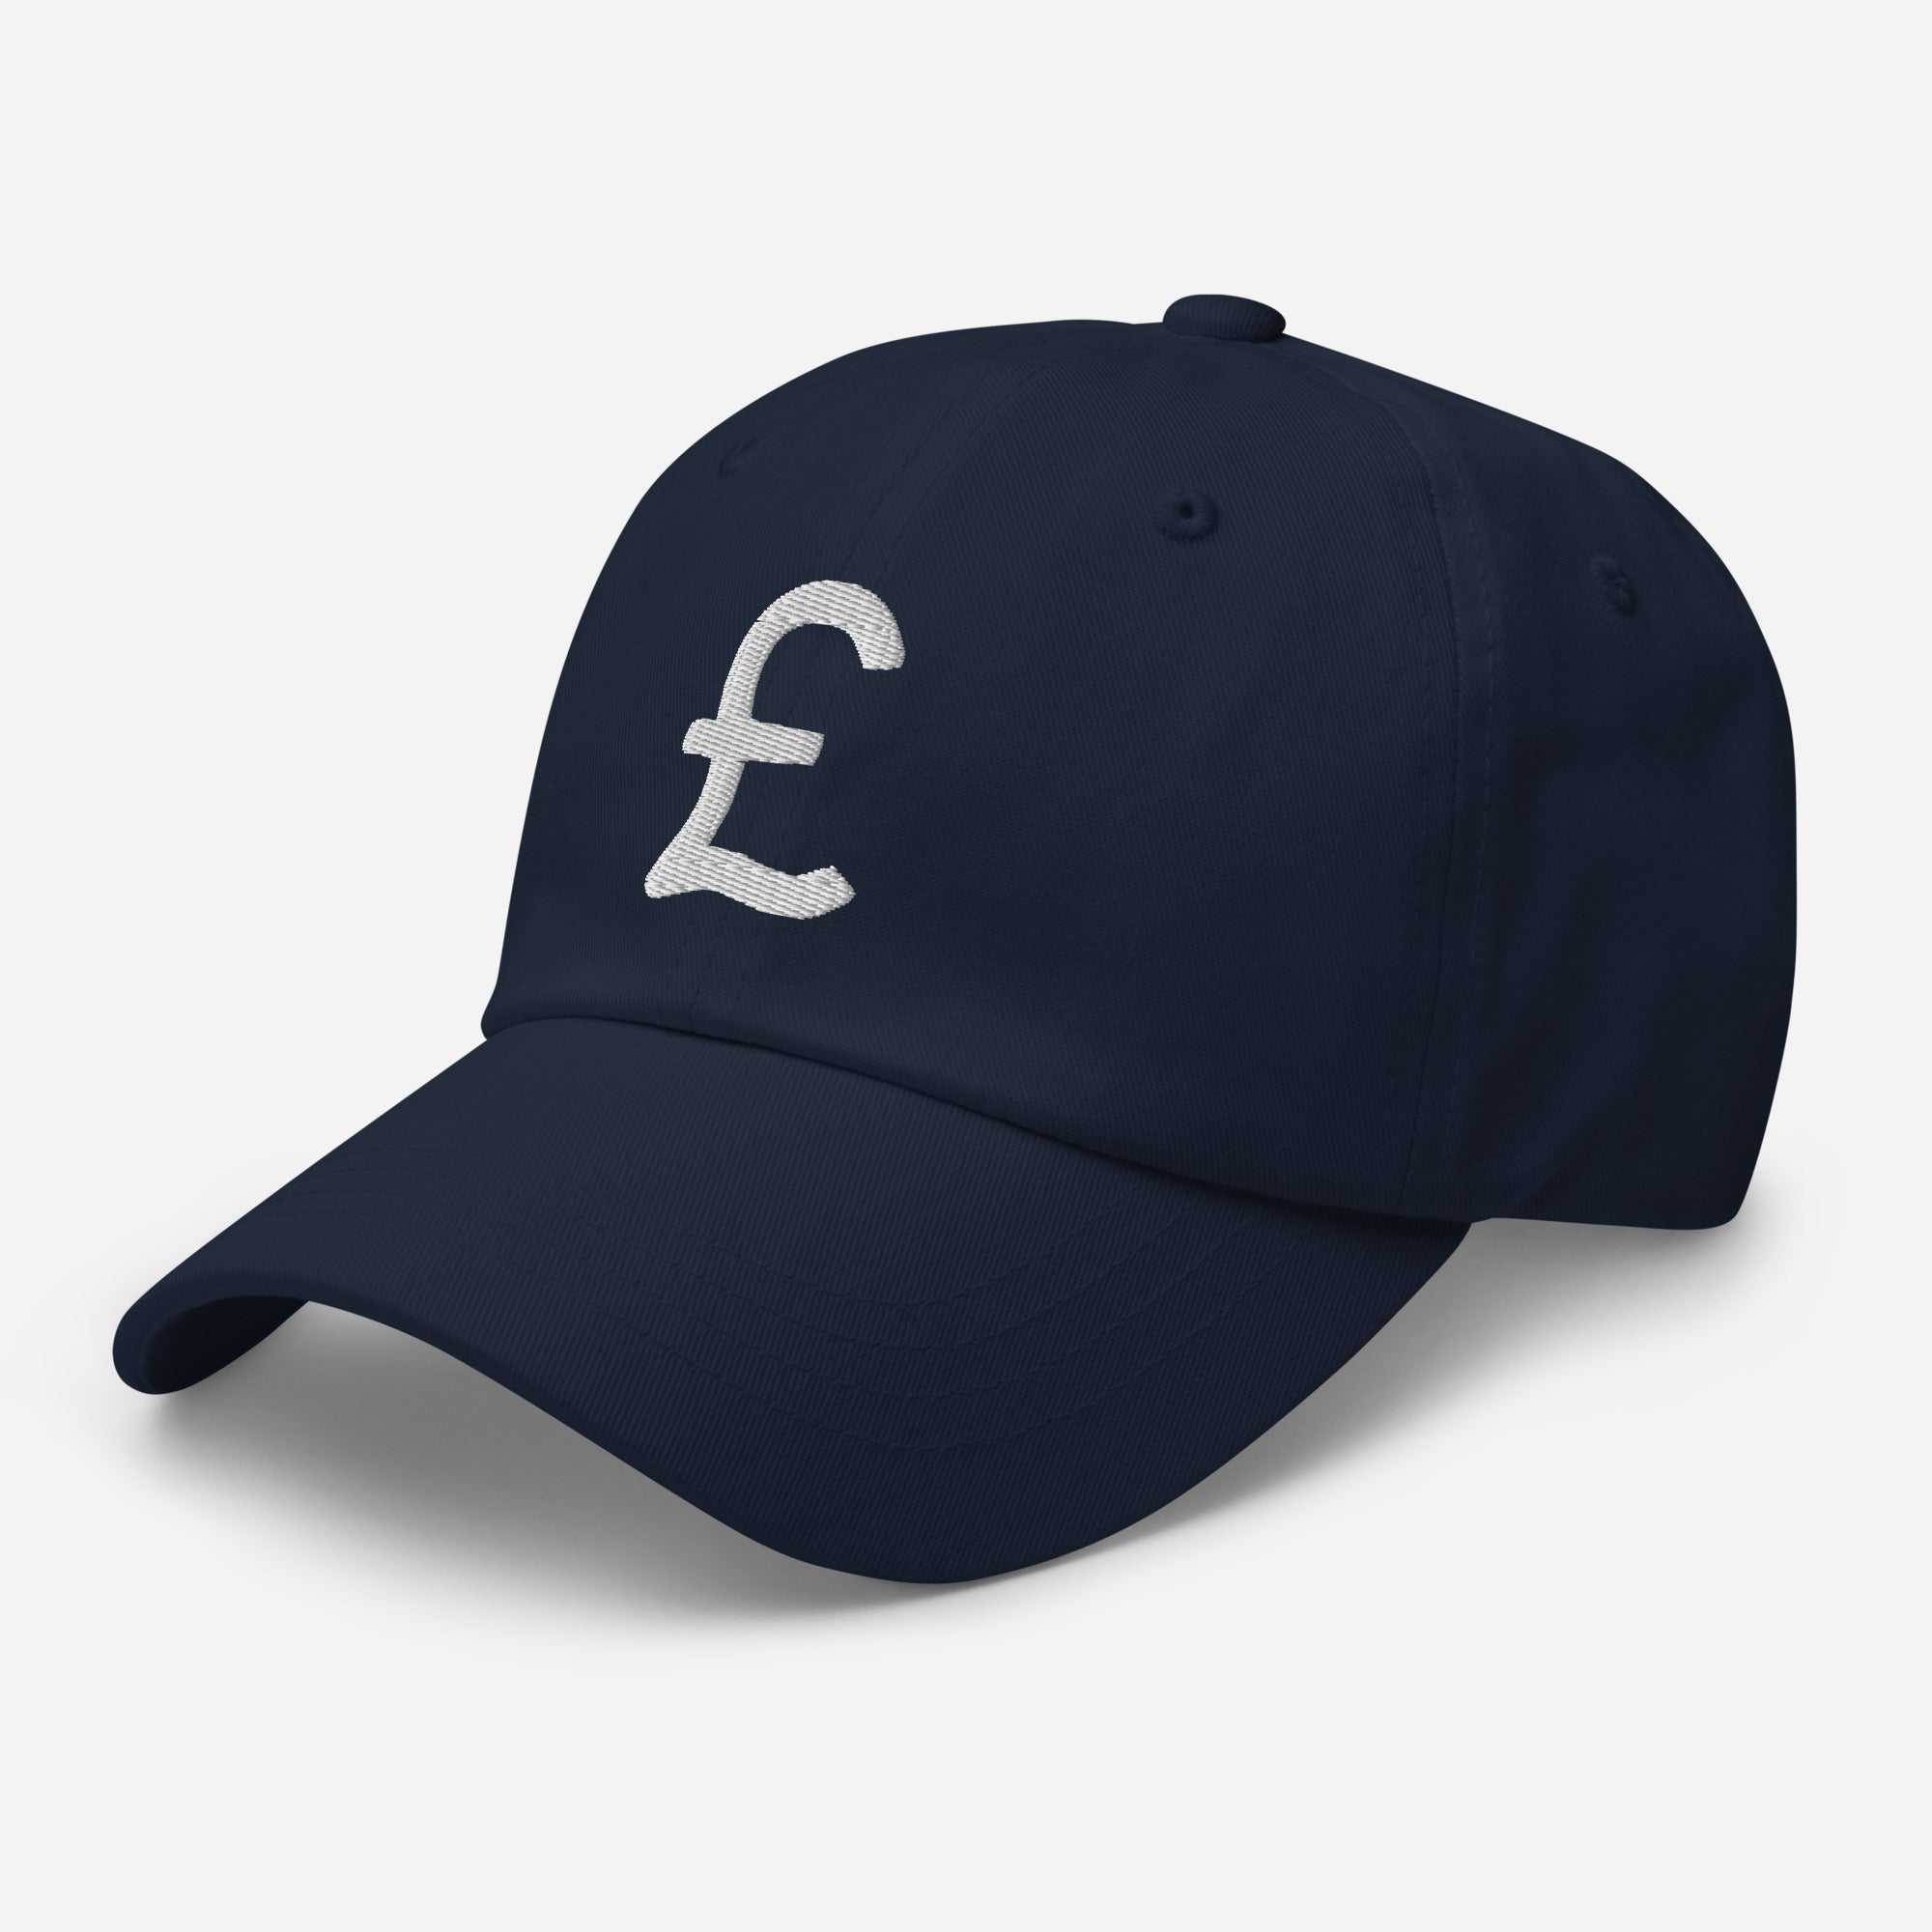 The British Pound Sterling Symbol Money Currency Embroidered Baseball Cap Dad hat